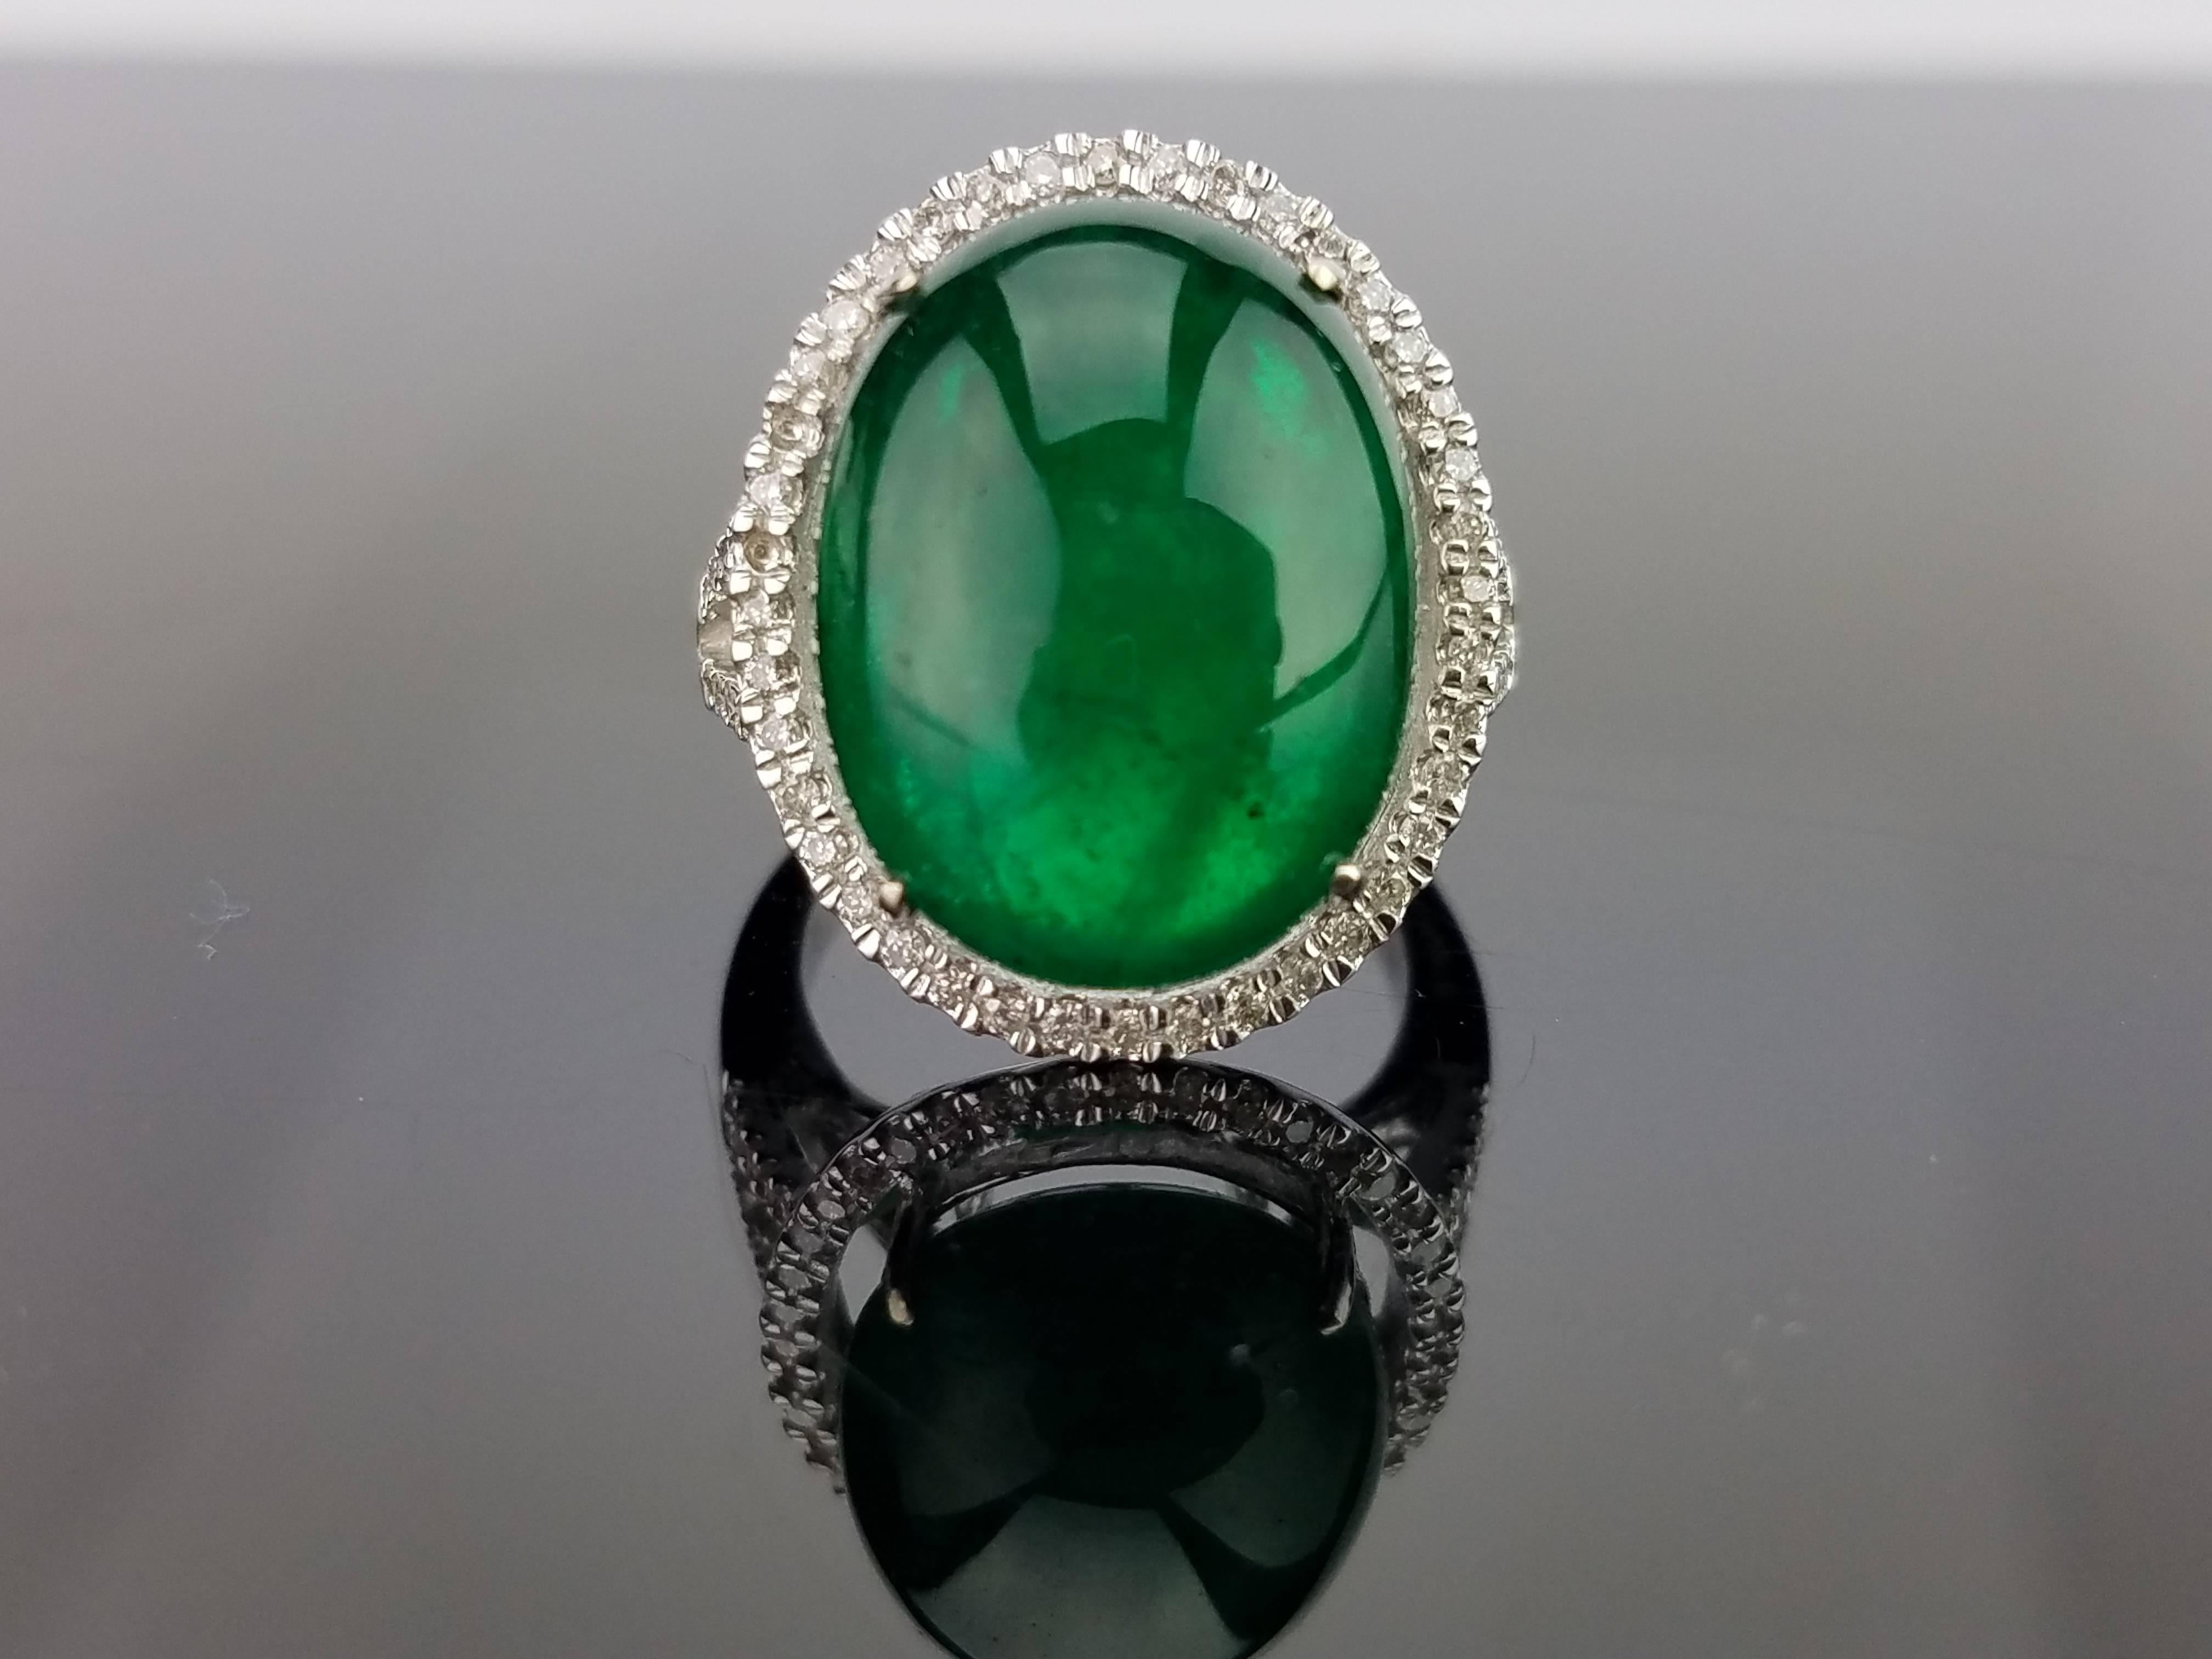 A statement Emerald cabochon cocktail ring sorrounded with diamonds, all set in 18K gold band. 

Stone Details: 
Stone: Zambian Emerald
Carat Weight: 17.35 Carats

Diamond Details: 
Total Carat Weight: 0.4 carat
Quality: VS/SI , H/I

18K Gold: 7.69